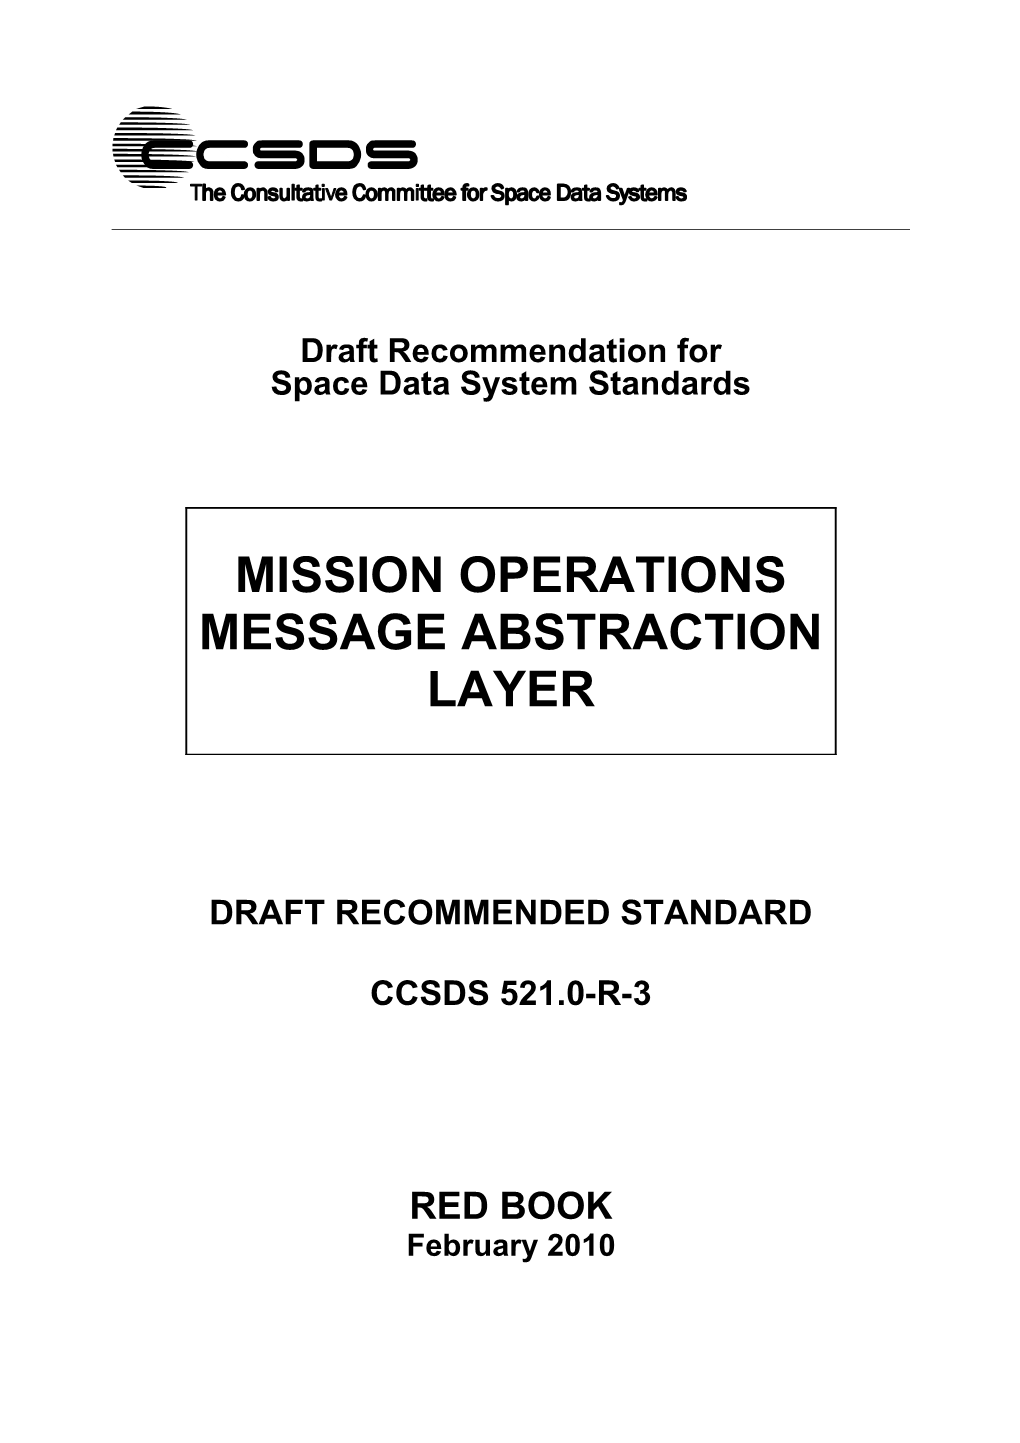 Mission Operations Message Abstraction Layer